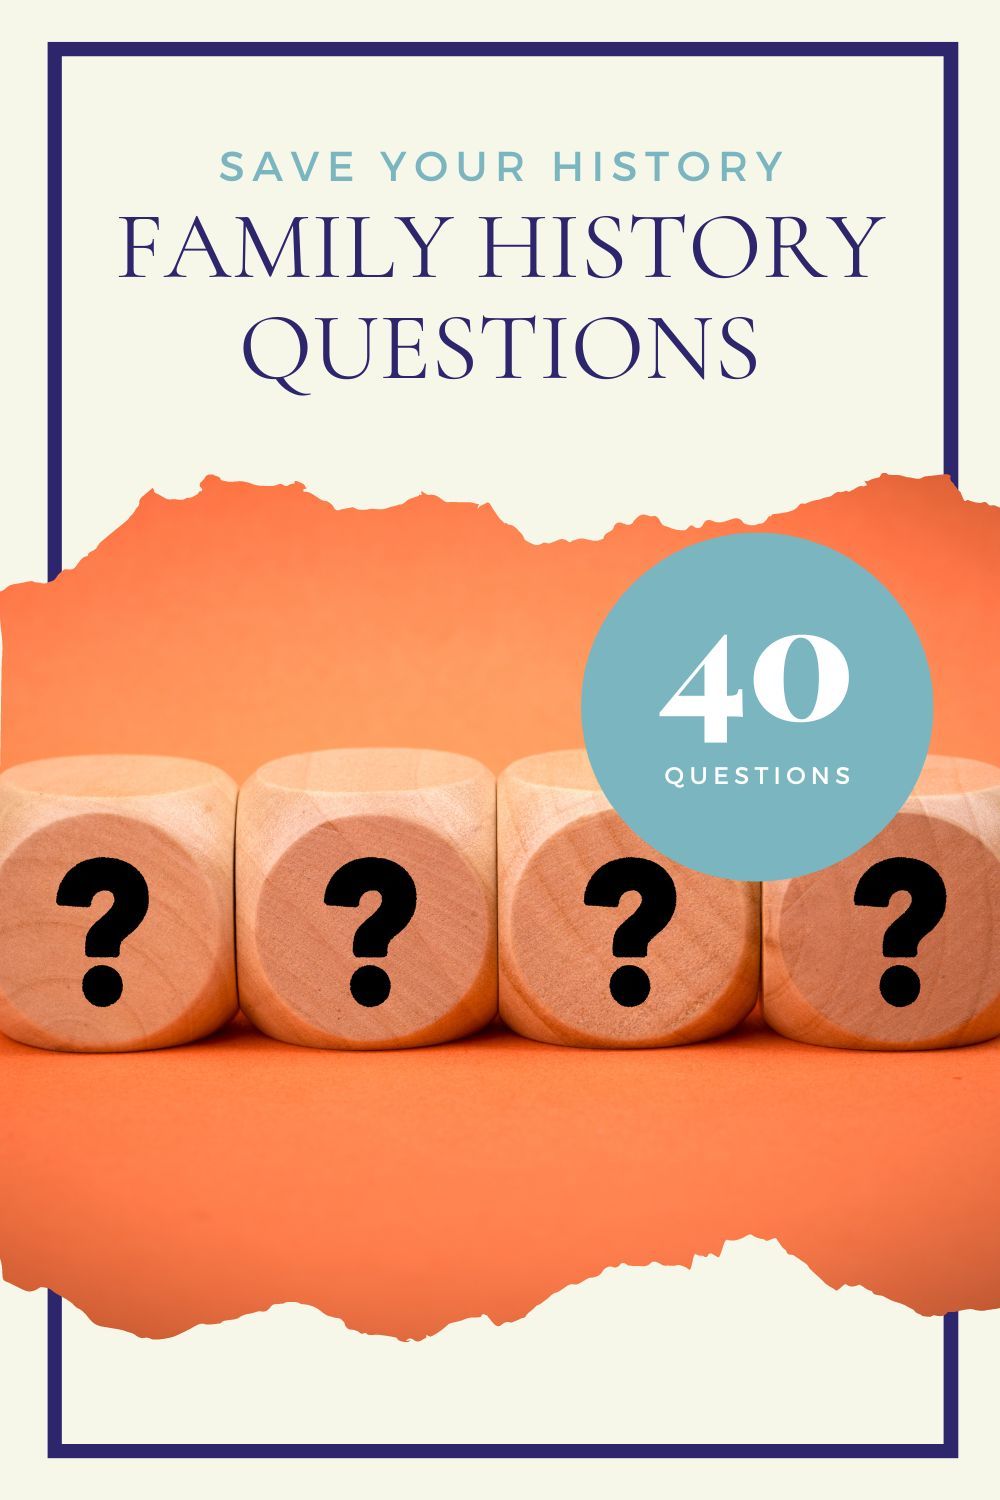 40 Questions to Preserve Your Family History